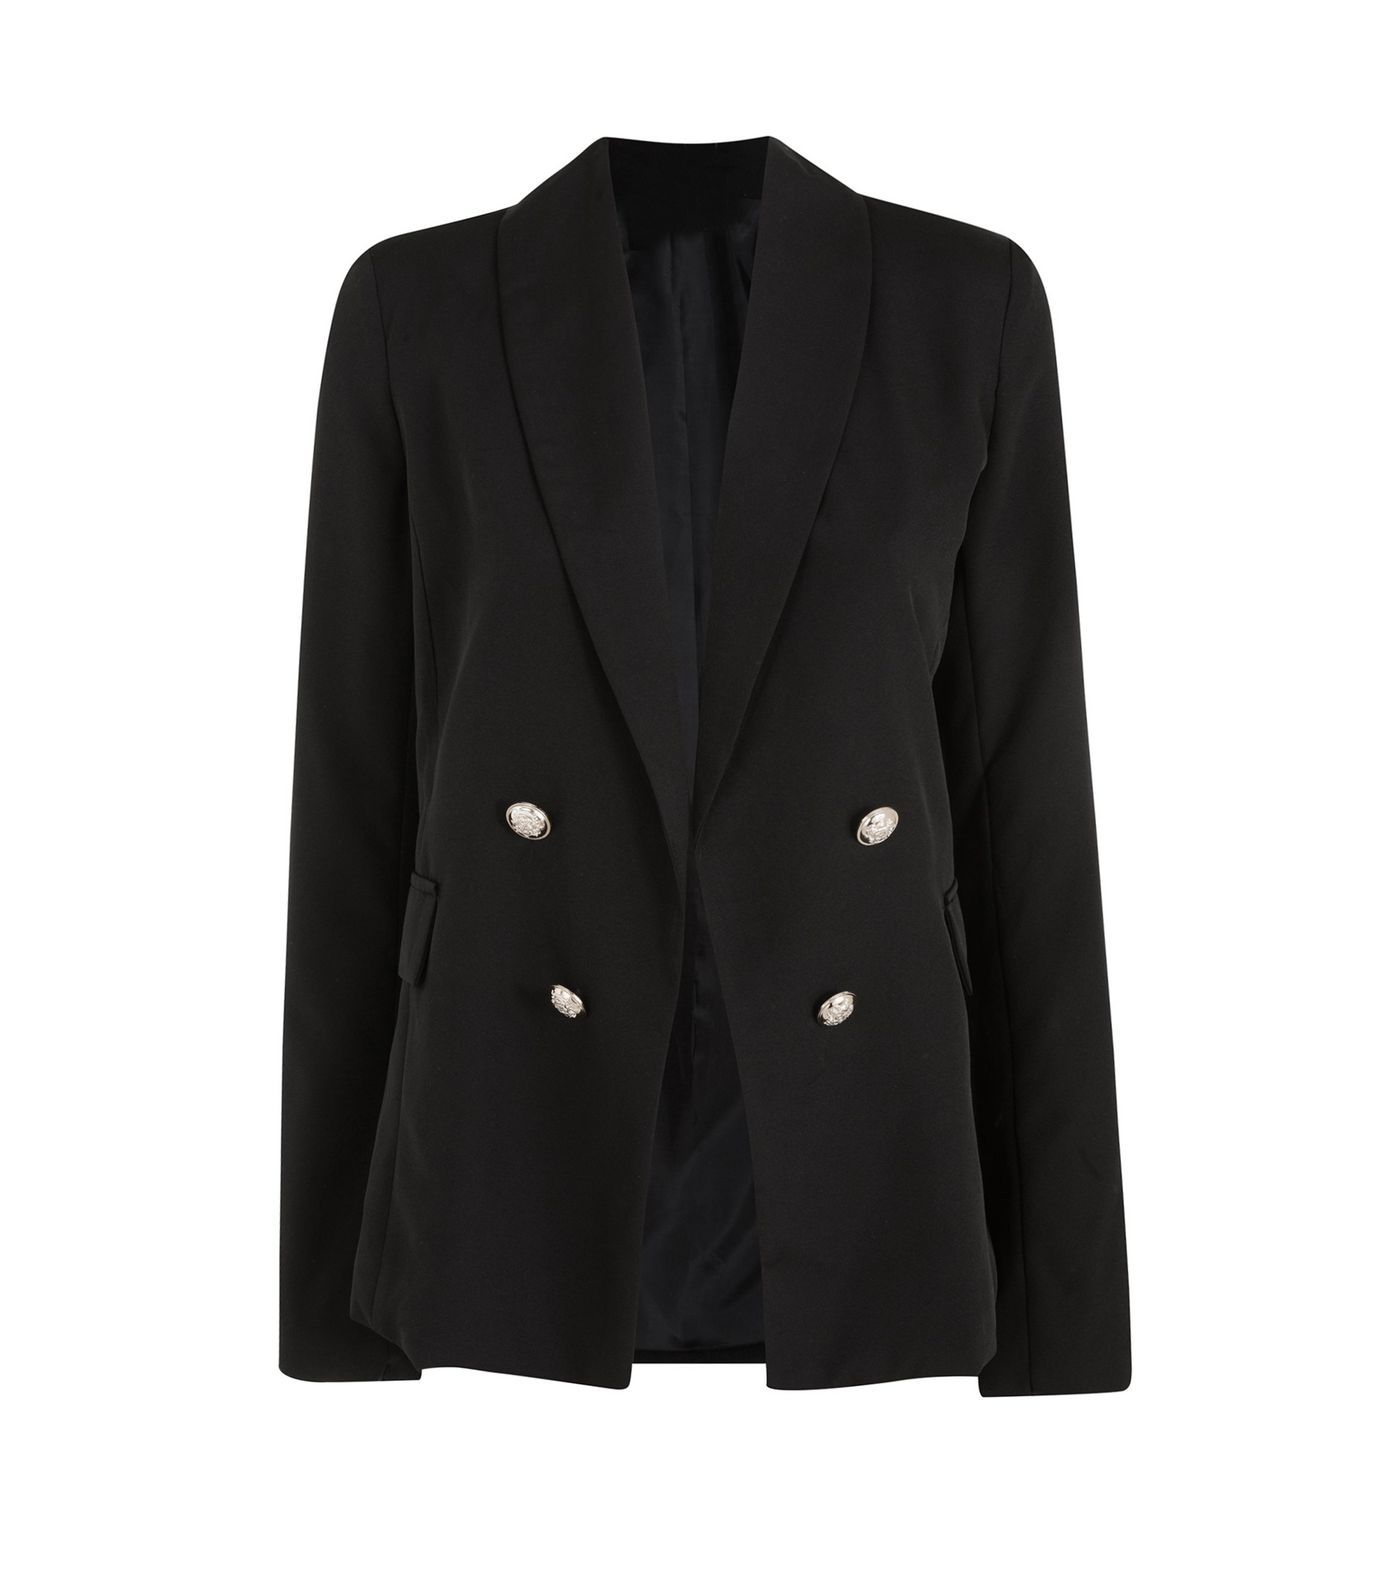 Tall Black Utility Button Blazer
						
						Add to Saved Items
						Remove from Saved Items | New Look (UK)